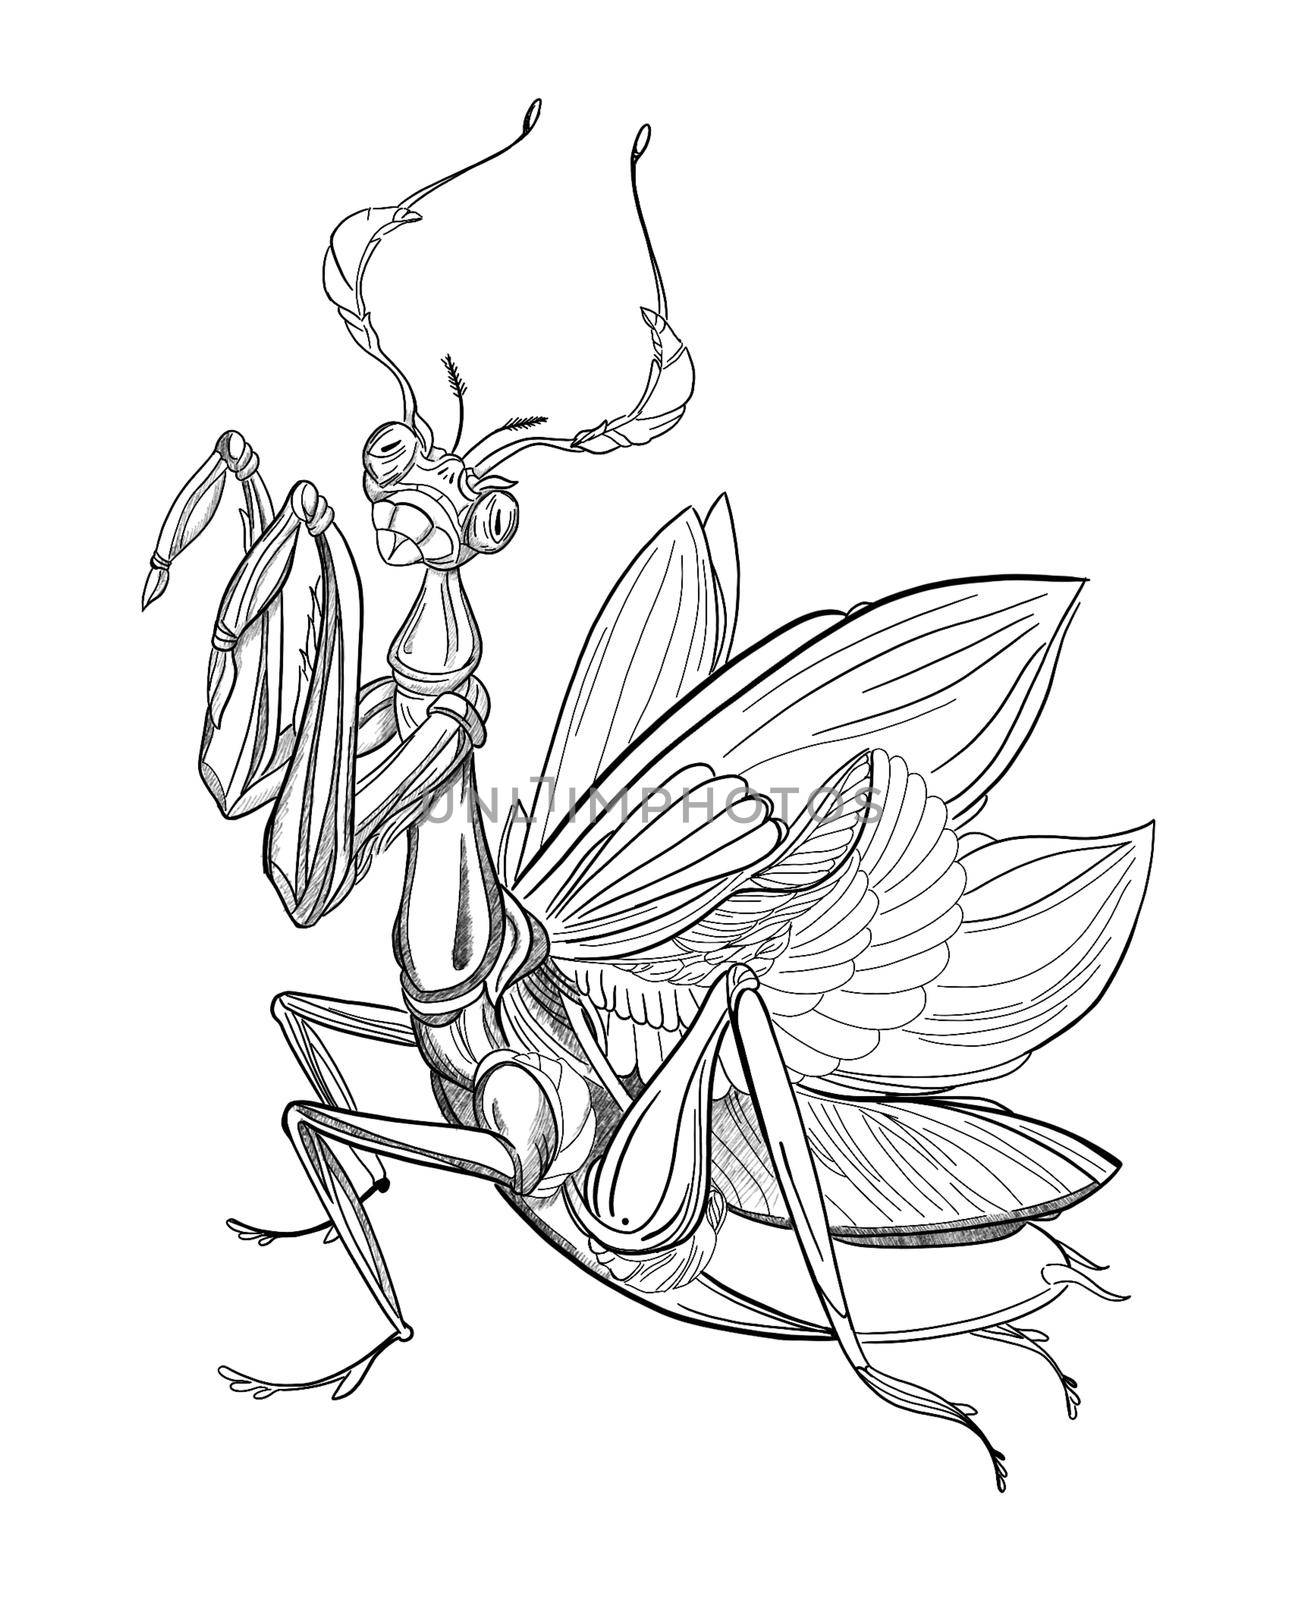 pencil drawing of a praying mantis with paws up by kr0k0